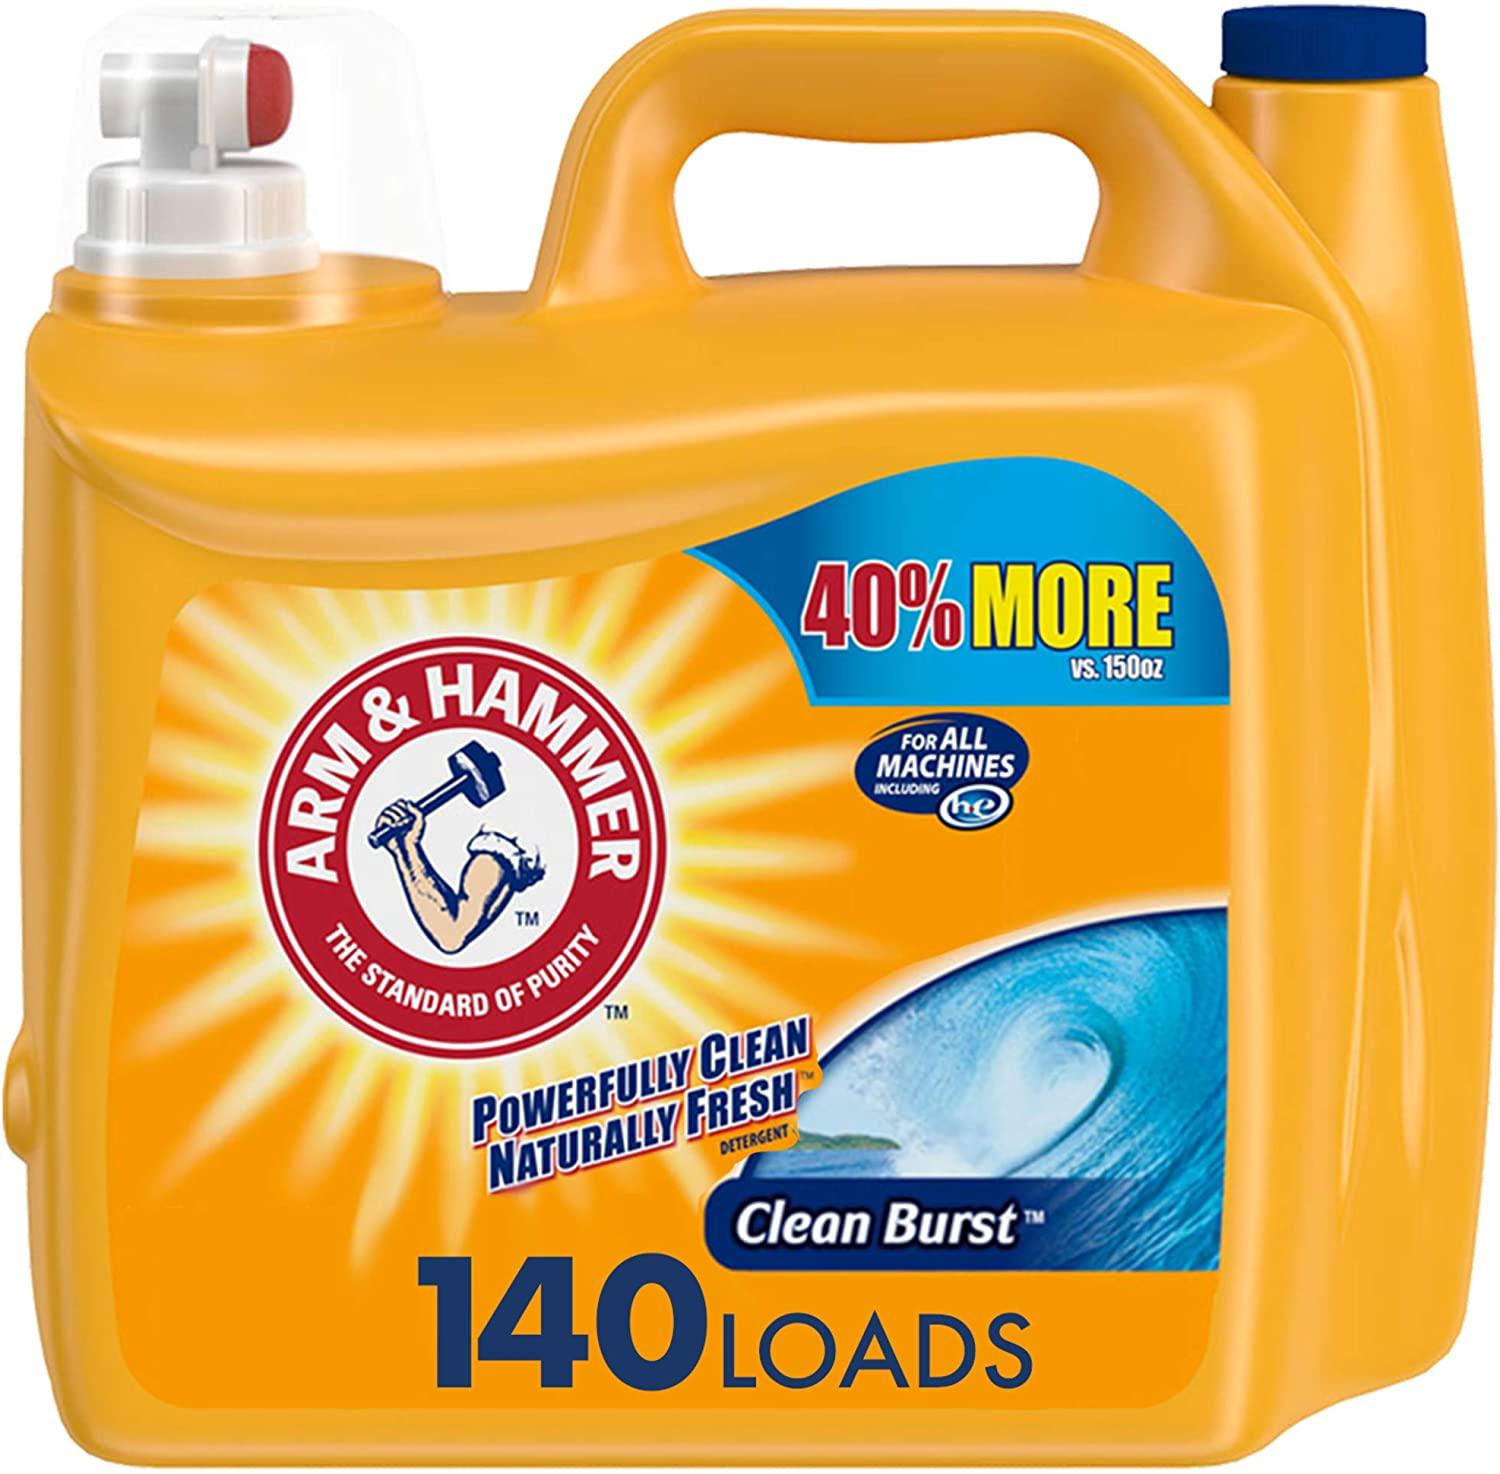 210Oz Arm and Hammer Liquid Laundry Detergent for $7.64